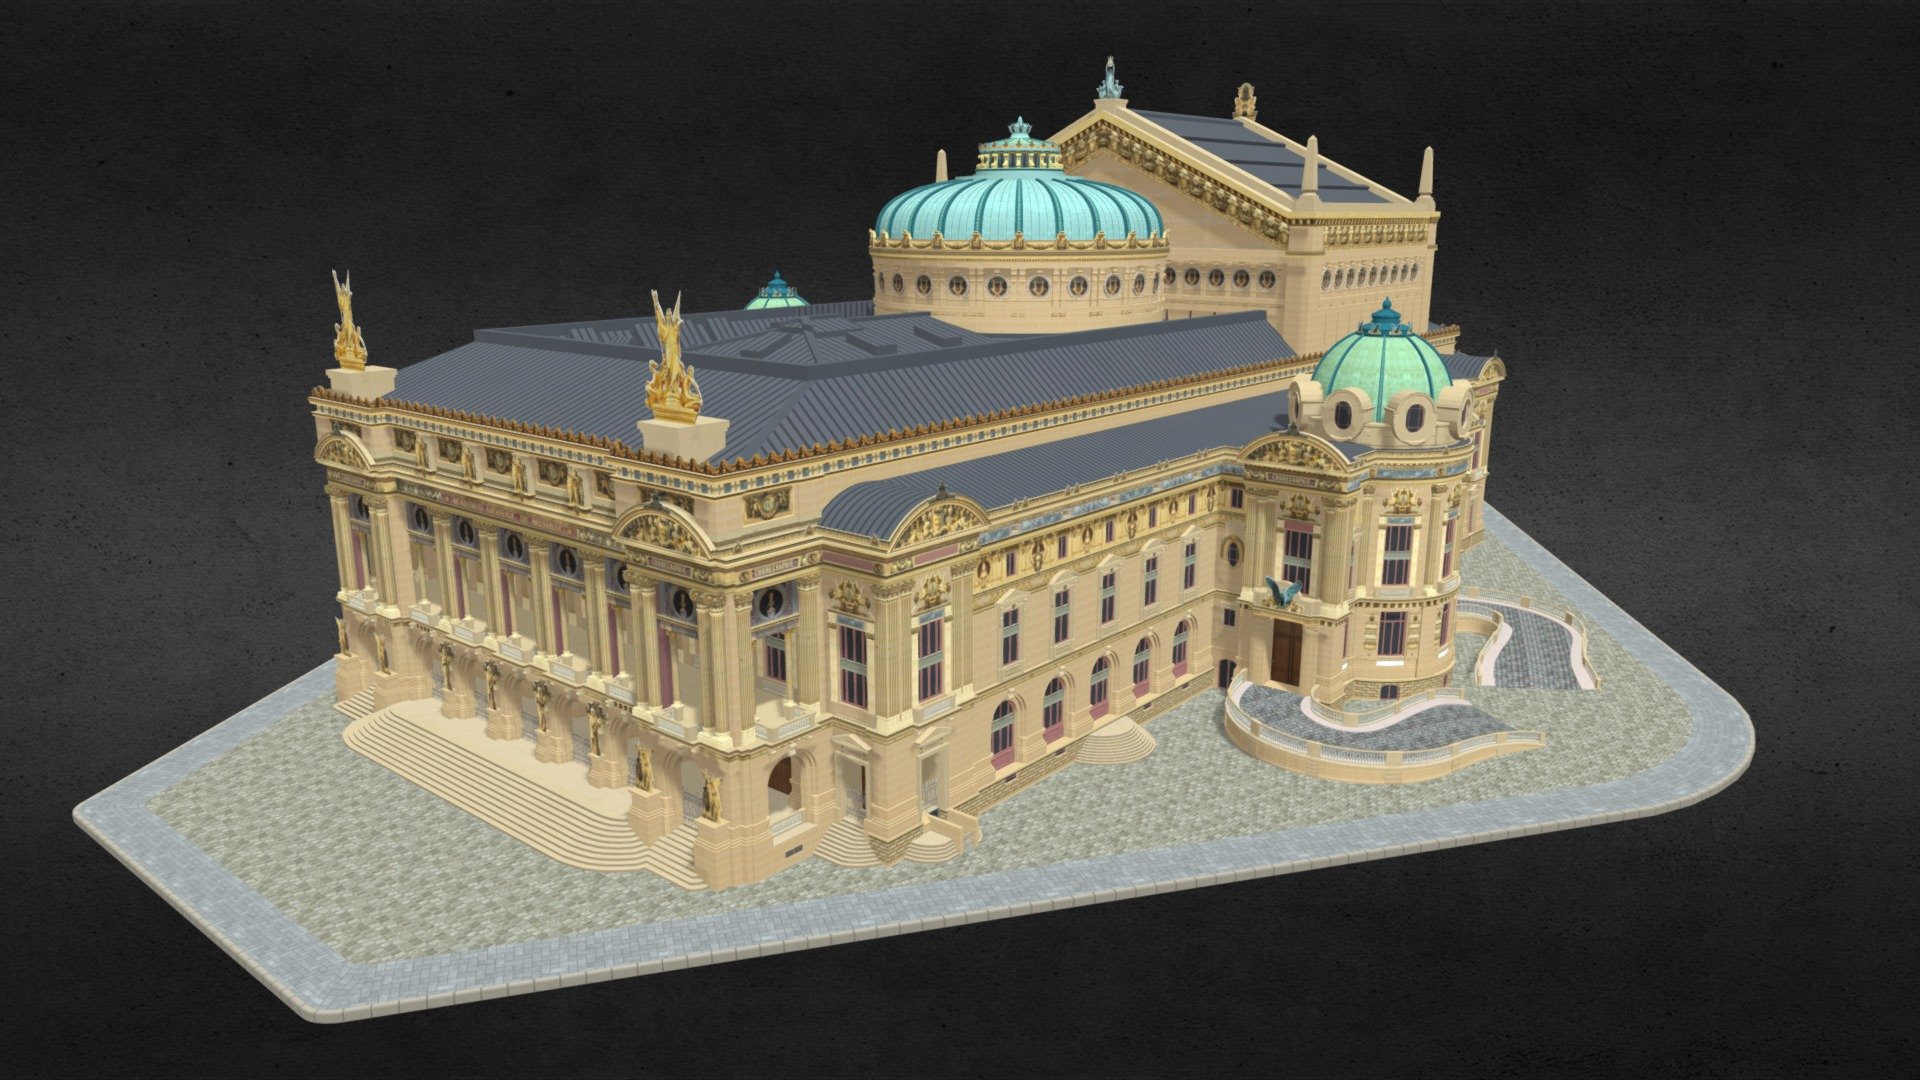 Opera Palais Garnier House Paris 3D Model
Originally created with 3ds Max 2015 and rendered in V-Ray 3.0. 

Total Poly Counts:
Poly Count = 817104
Vertex Count = 852654

https://nuralam3d.blogspot.com/2022/06/opera-palais-garnier-house-paris-3d.html - Opera Palais Garnier House Paris 3D Model - 3D model by nuralam018 3d model